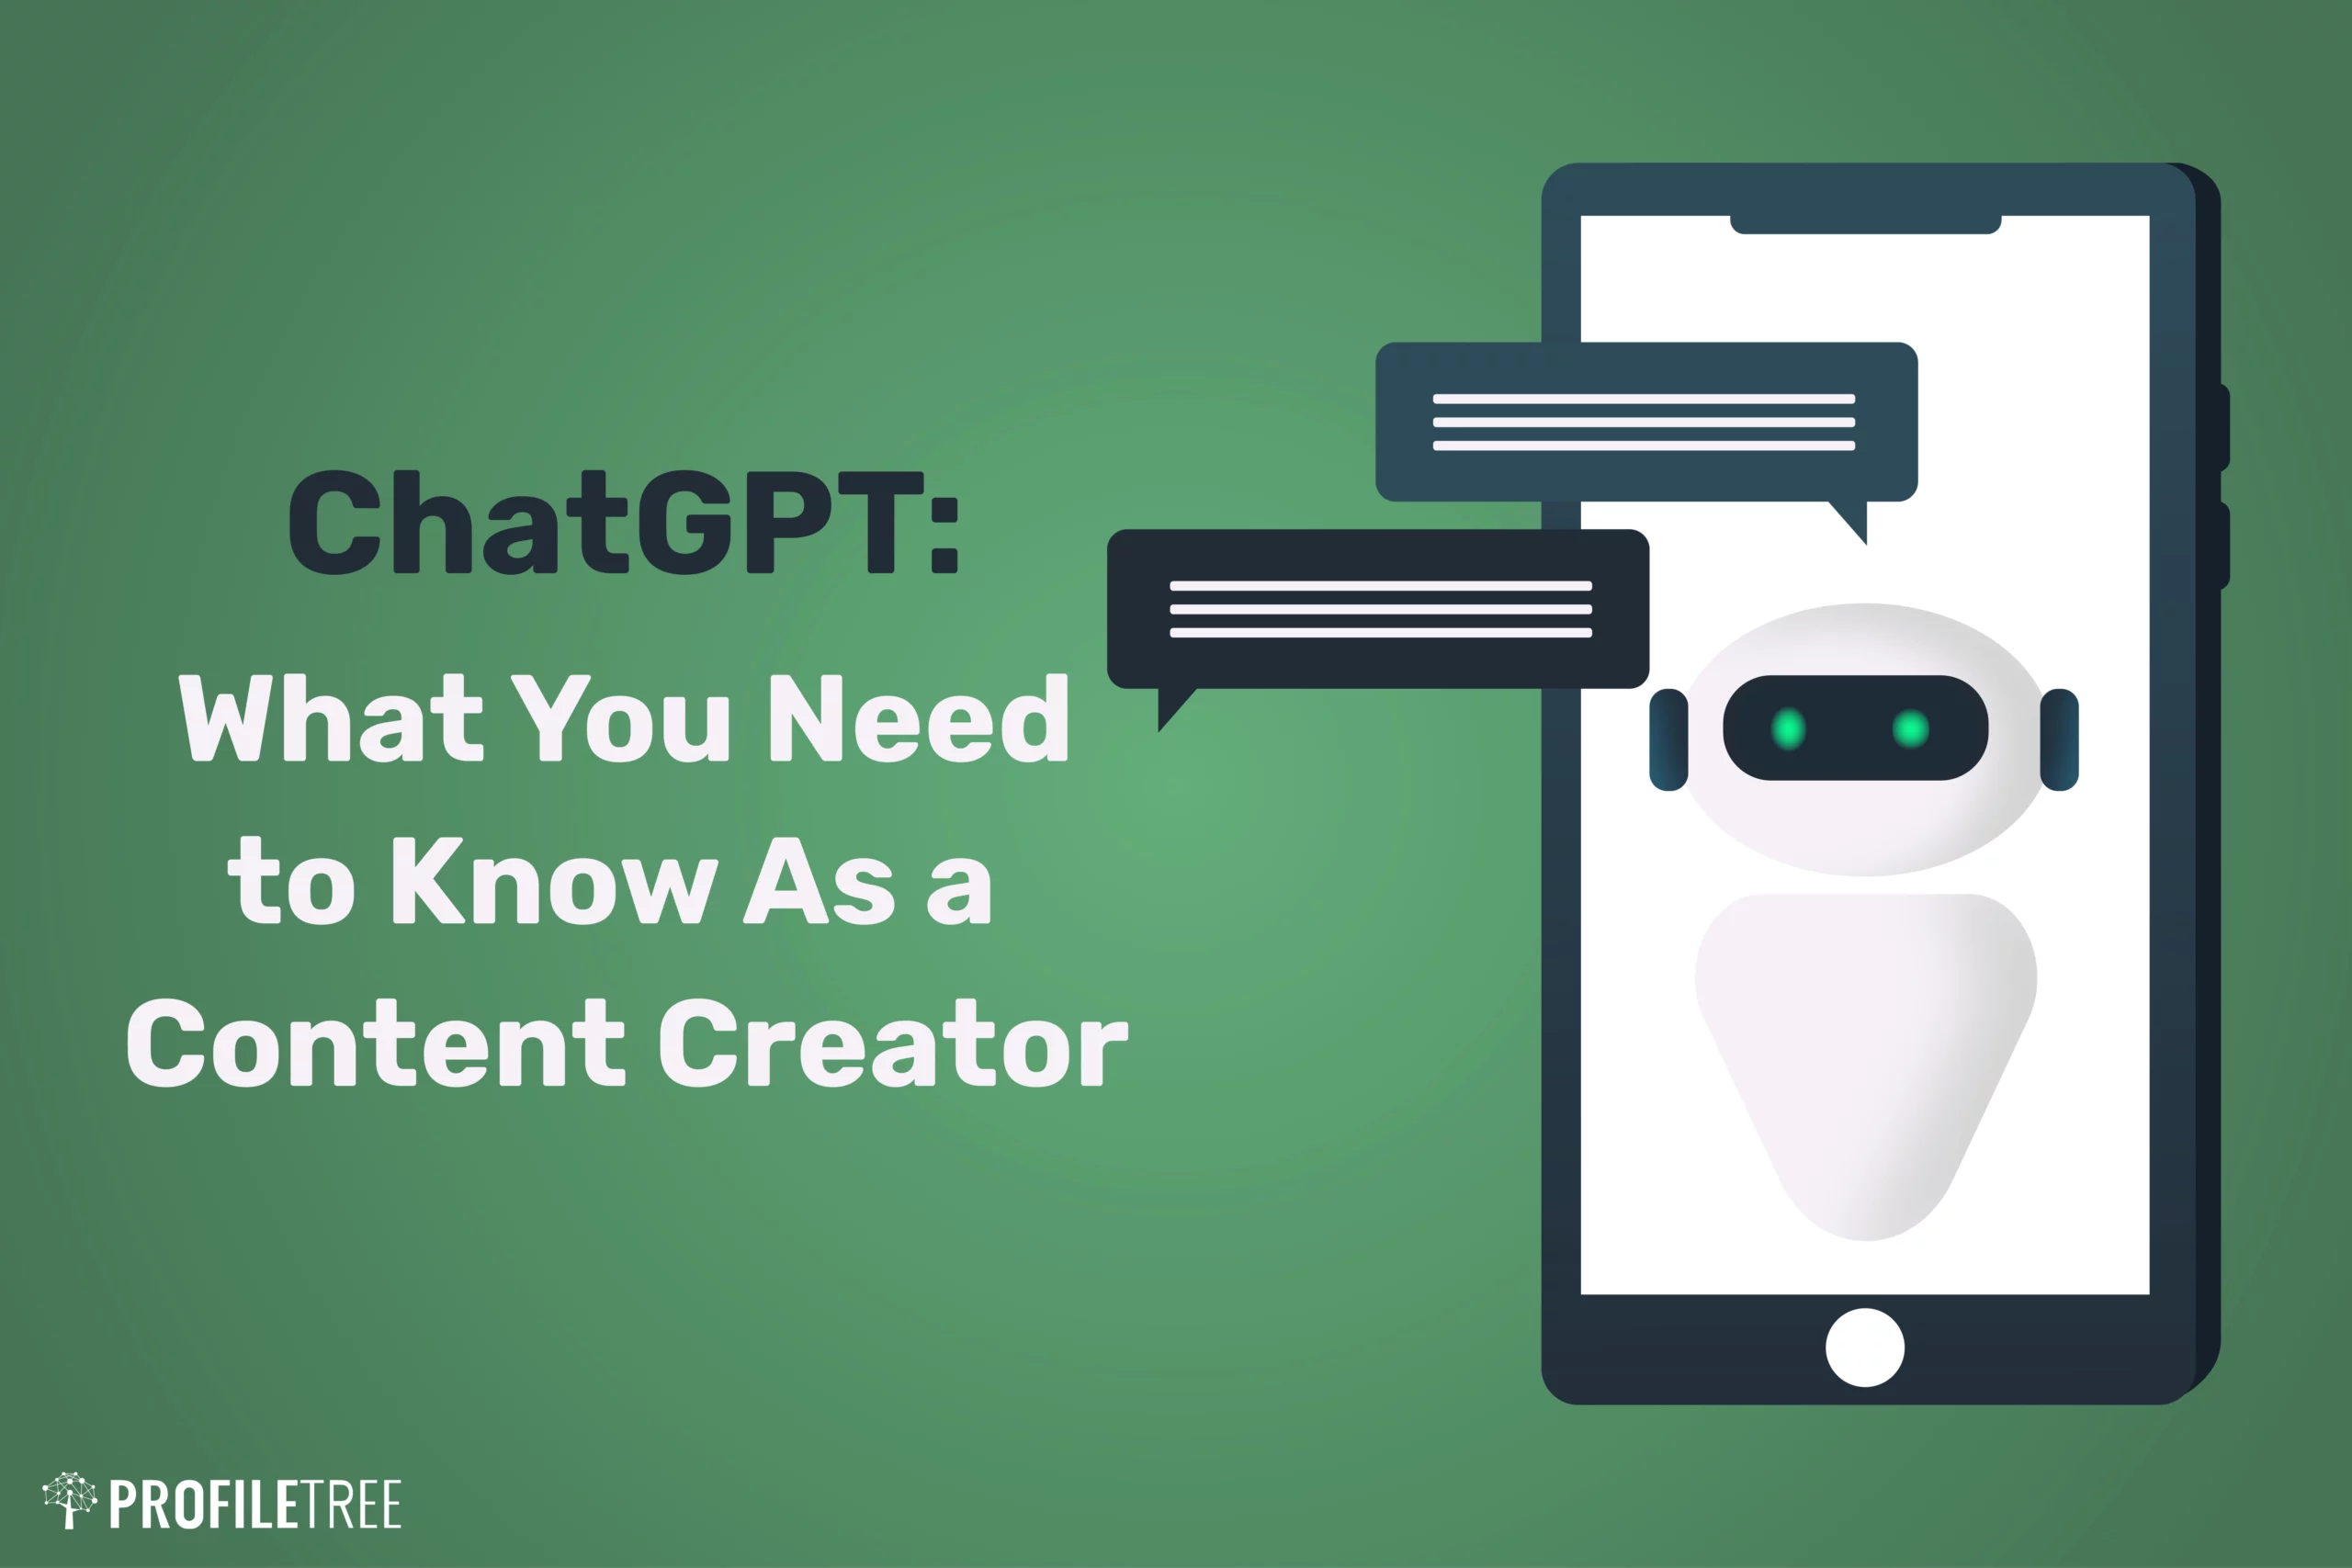 ChatGPT: What You Need to Know As a Content Creator